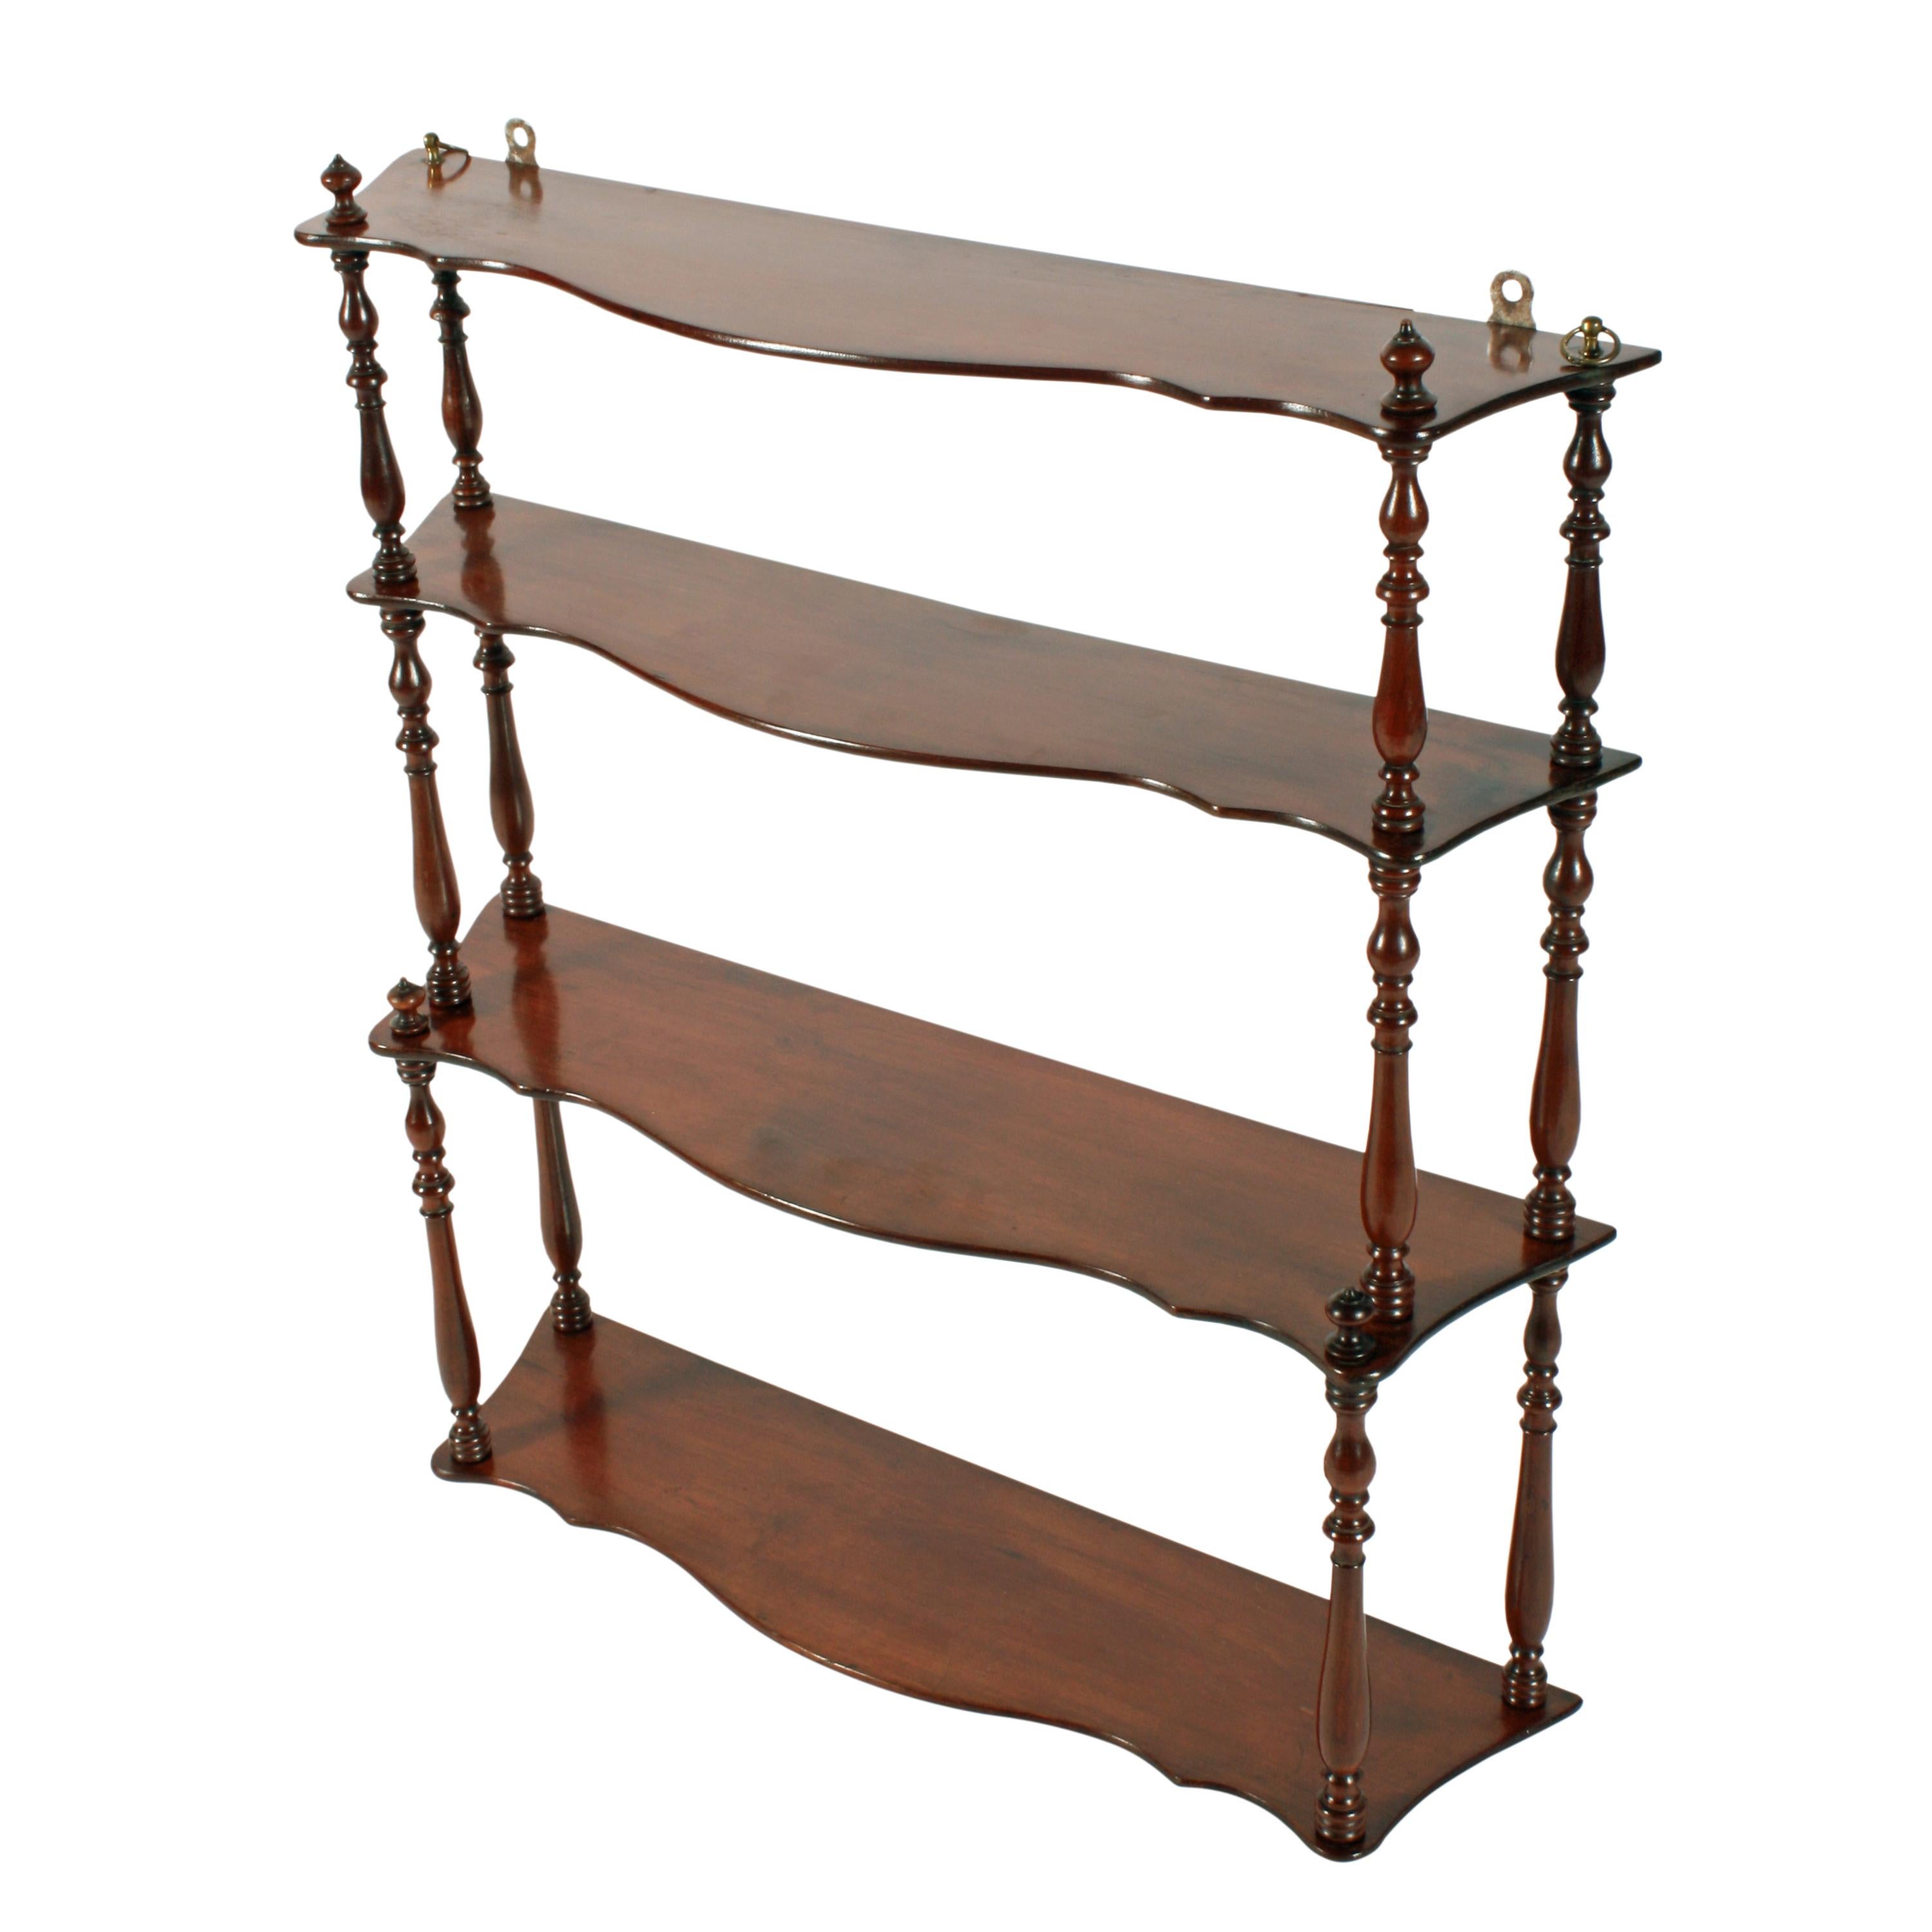 A set of mid-19th century mahogany wall shelves.

The shelves have serpentine shaped fronts, turned supports between each shelf and the bottom two shelves are deeper than the top two.

The shelves are in good condition and can be hung by brass